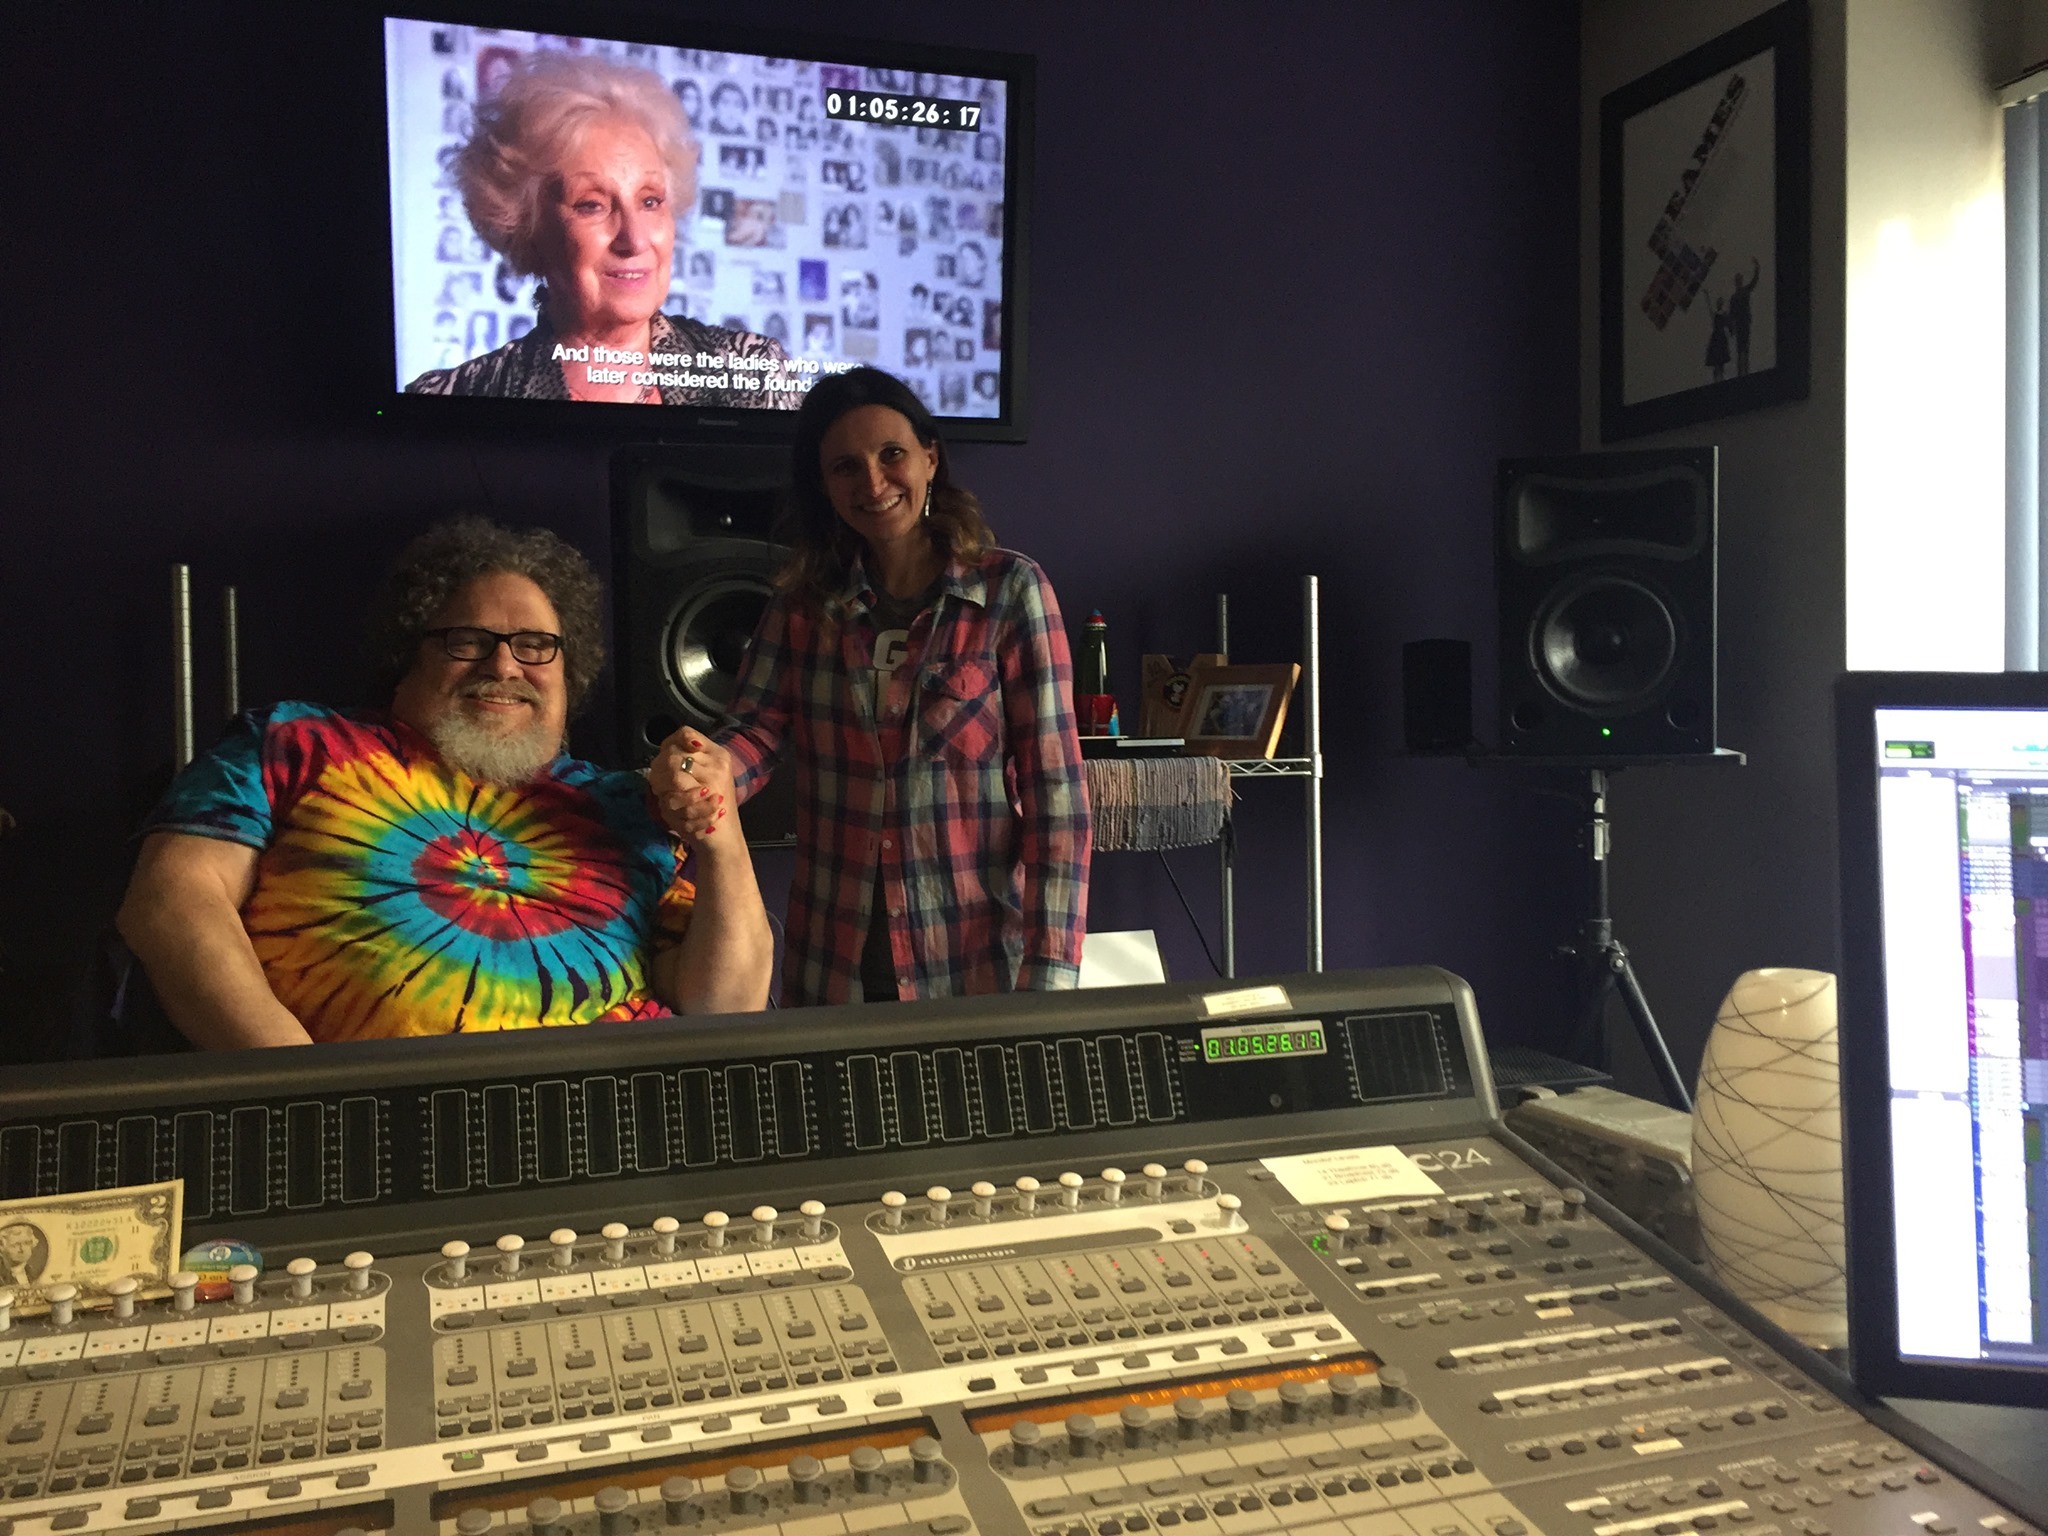 Two people are in a recording studio at Berkeley Journalism. One person, wearing a colorful tie-dye shirt, is seated, while the other, in a plaid shirt, stands beside them. A sound mixing console dominates the foreground, and a television screen shows an elderly woman in the background.